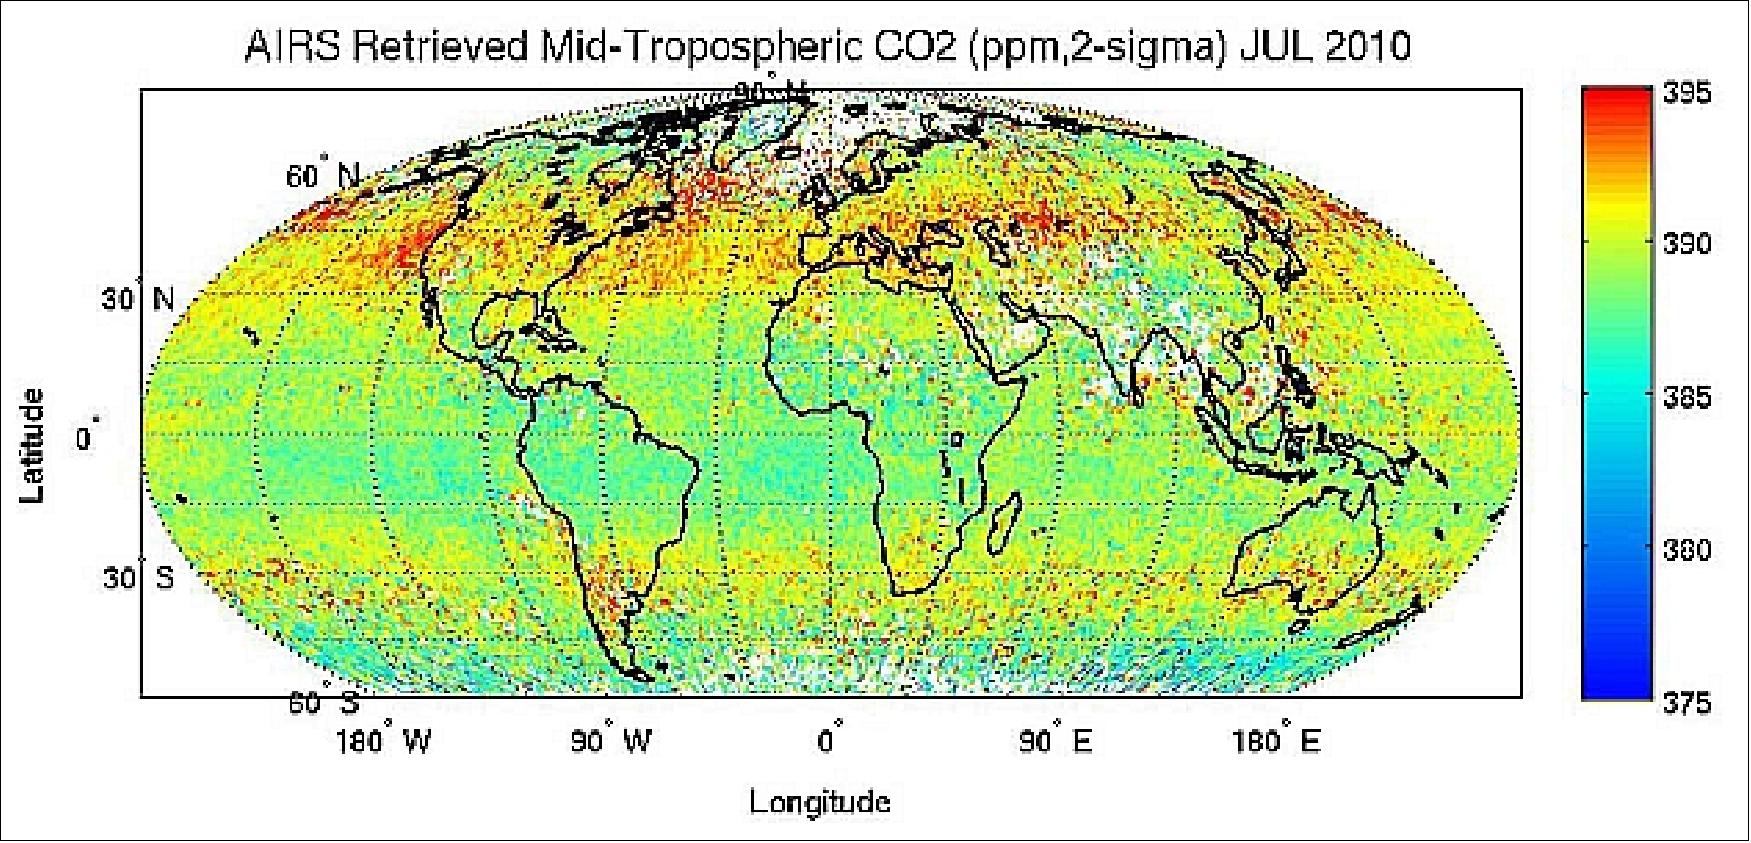 Figure 58: AIRS mid-tropospheric CO2 is a tracer for atmospheric motion particularly in the vertical direction. July, 2010 monthly average (image credit: NASA/JPL)